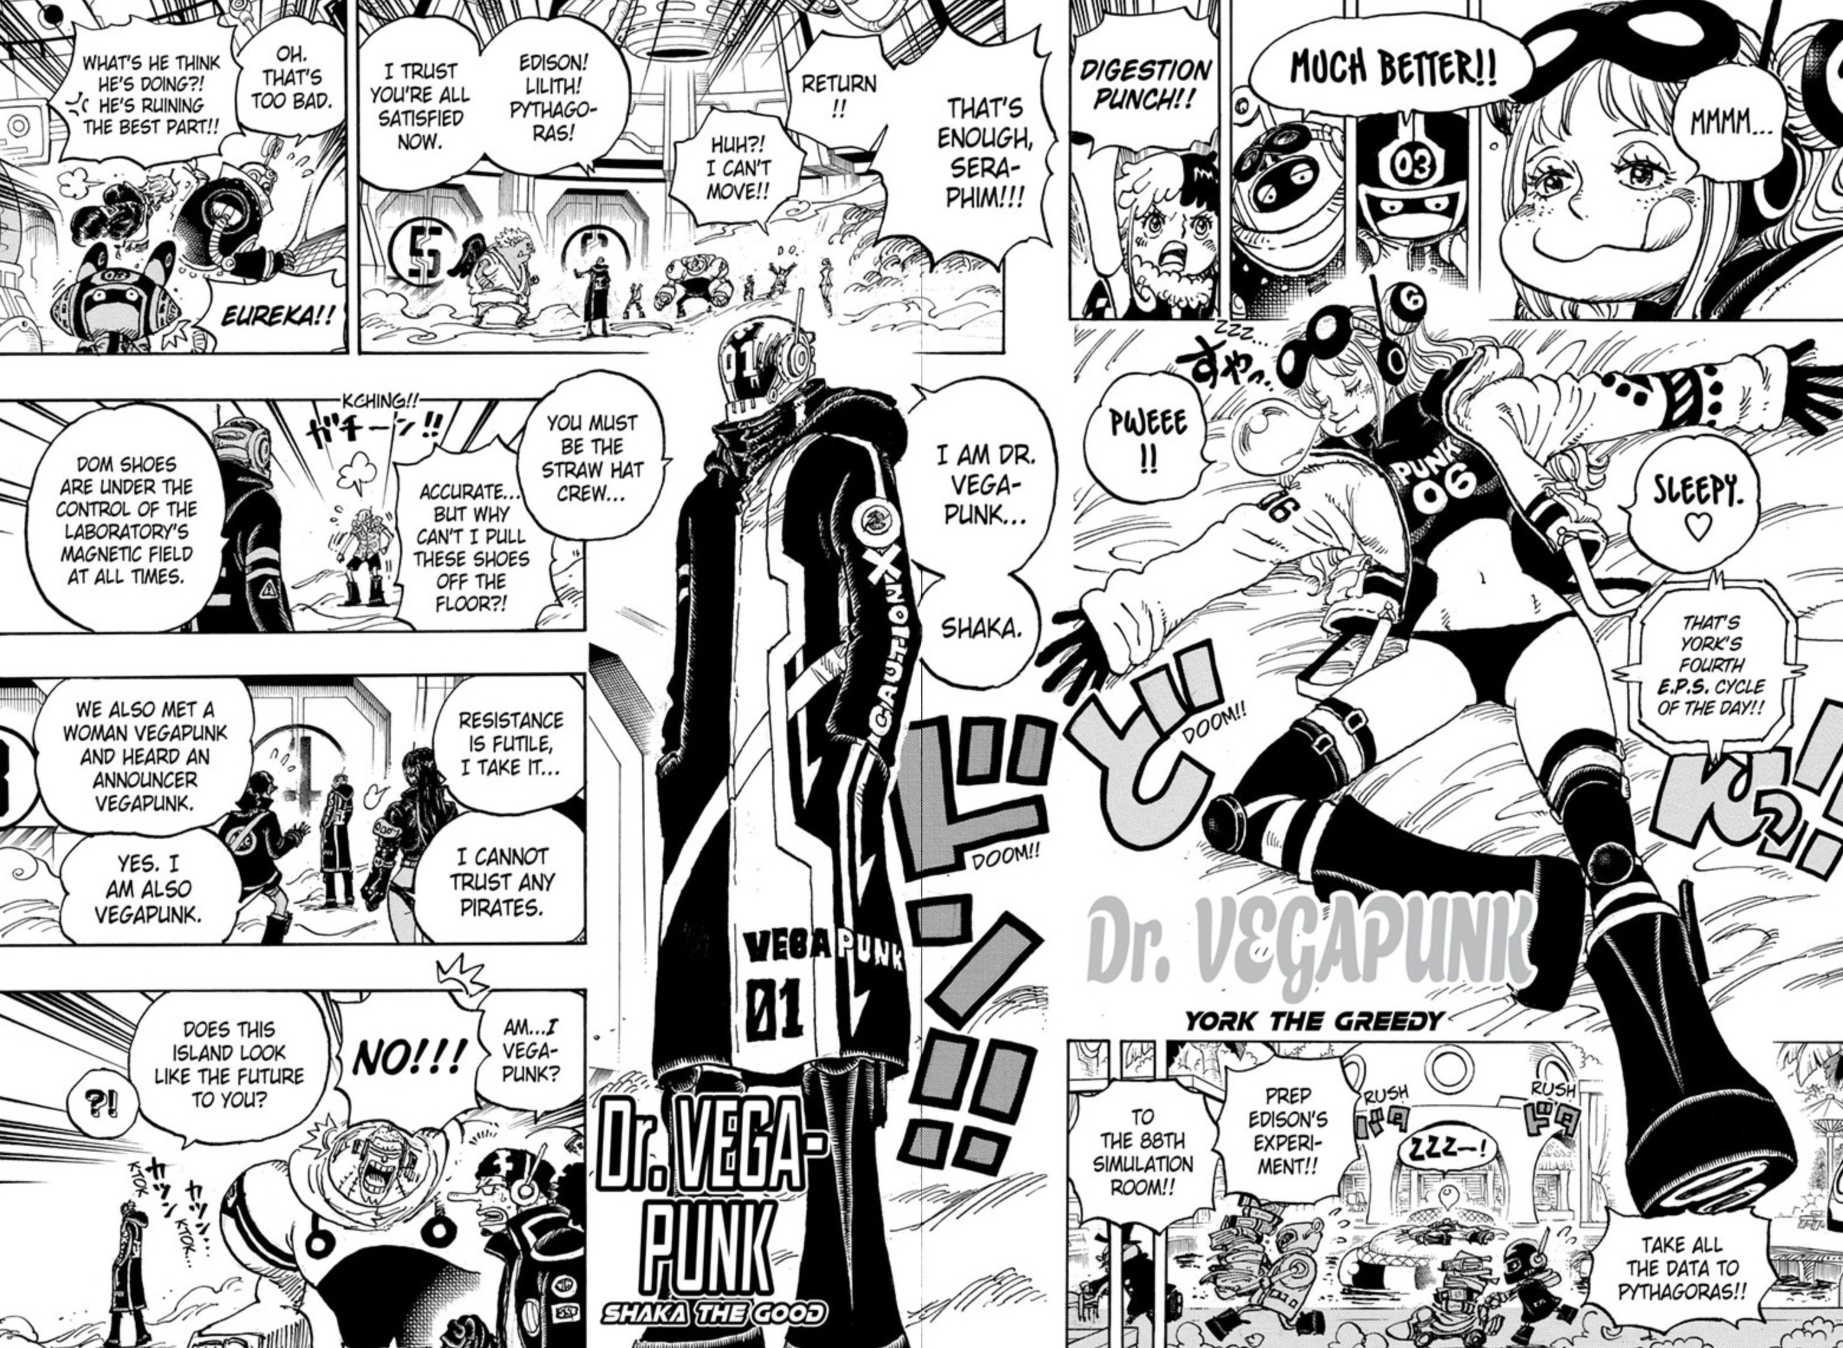 One Piece Chapter 1065 Pages 16-17